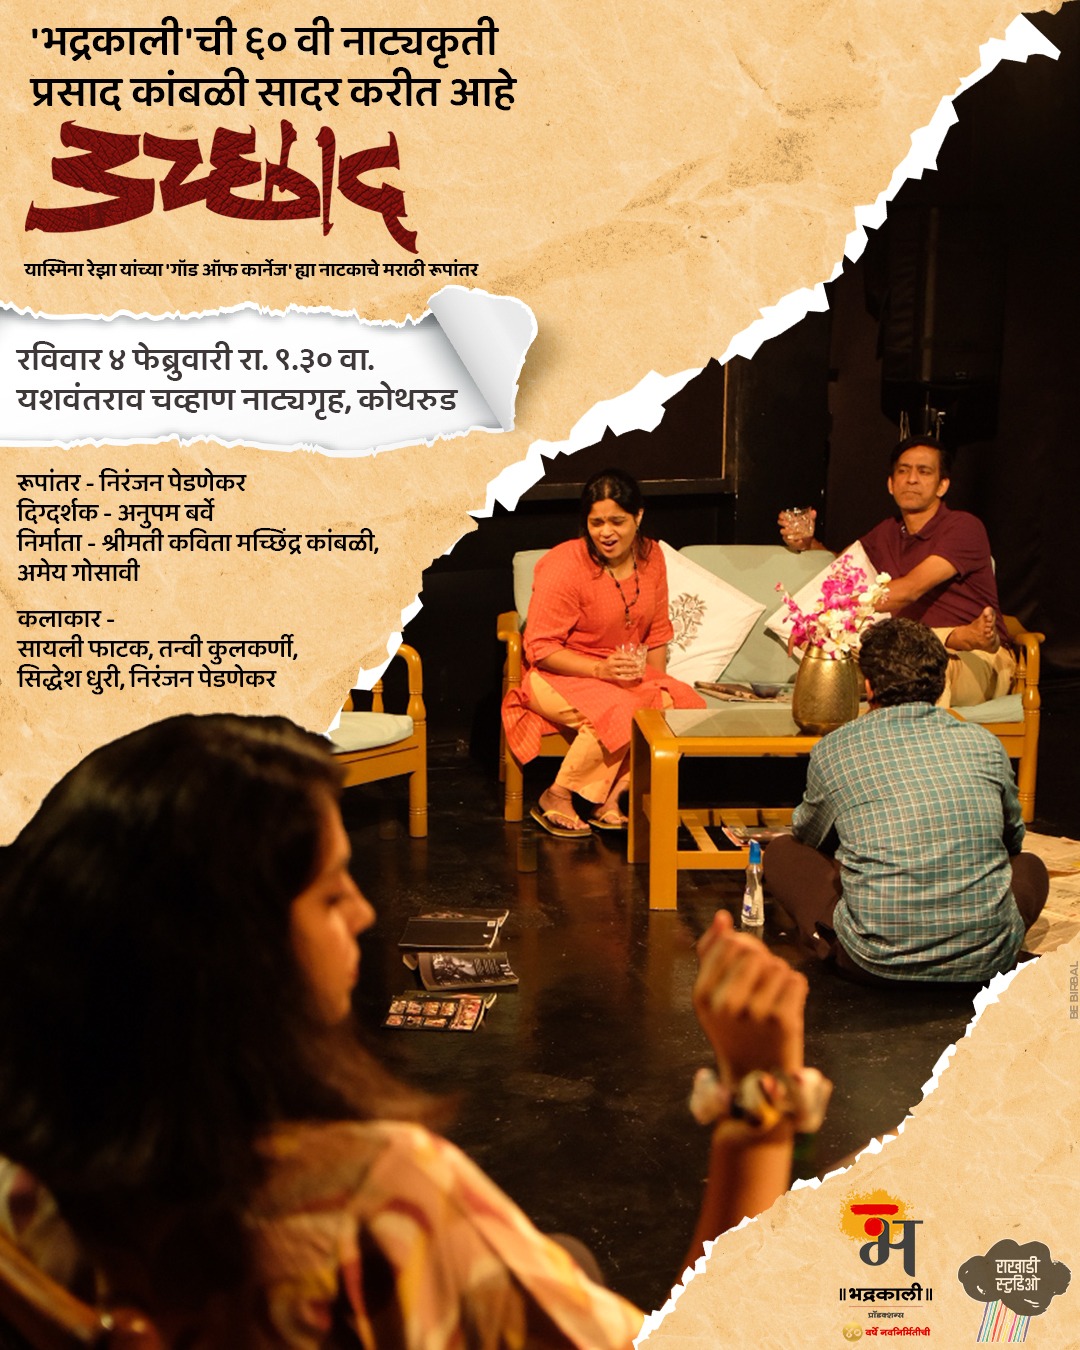 Uchchad drama will be launched in Pune on 4 February